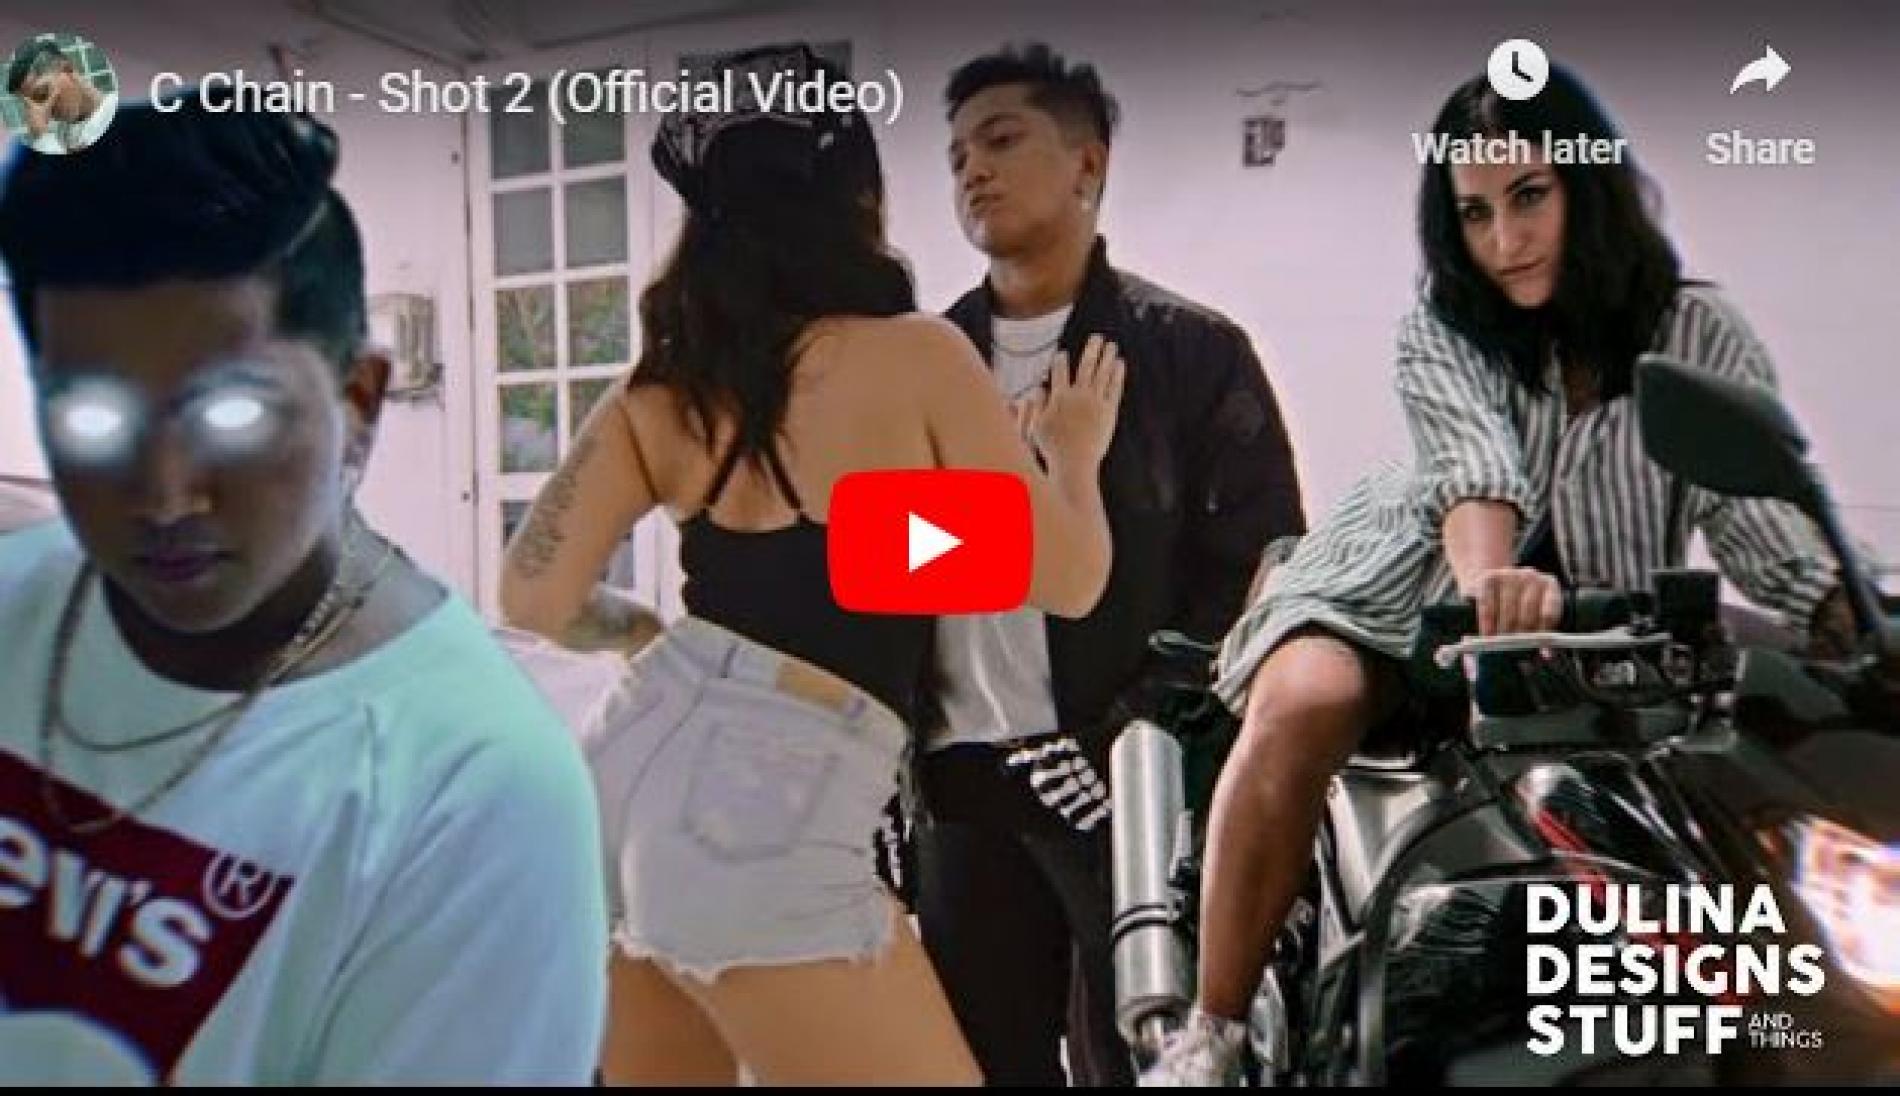 New Music : C Chain – Shot 2 (Official Video)